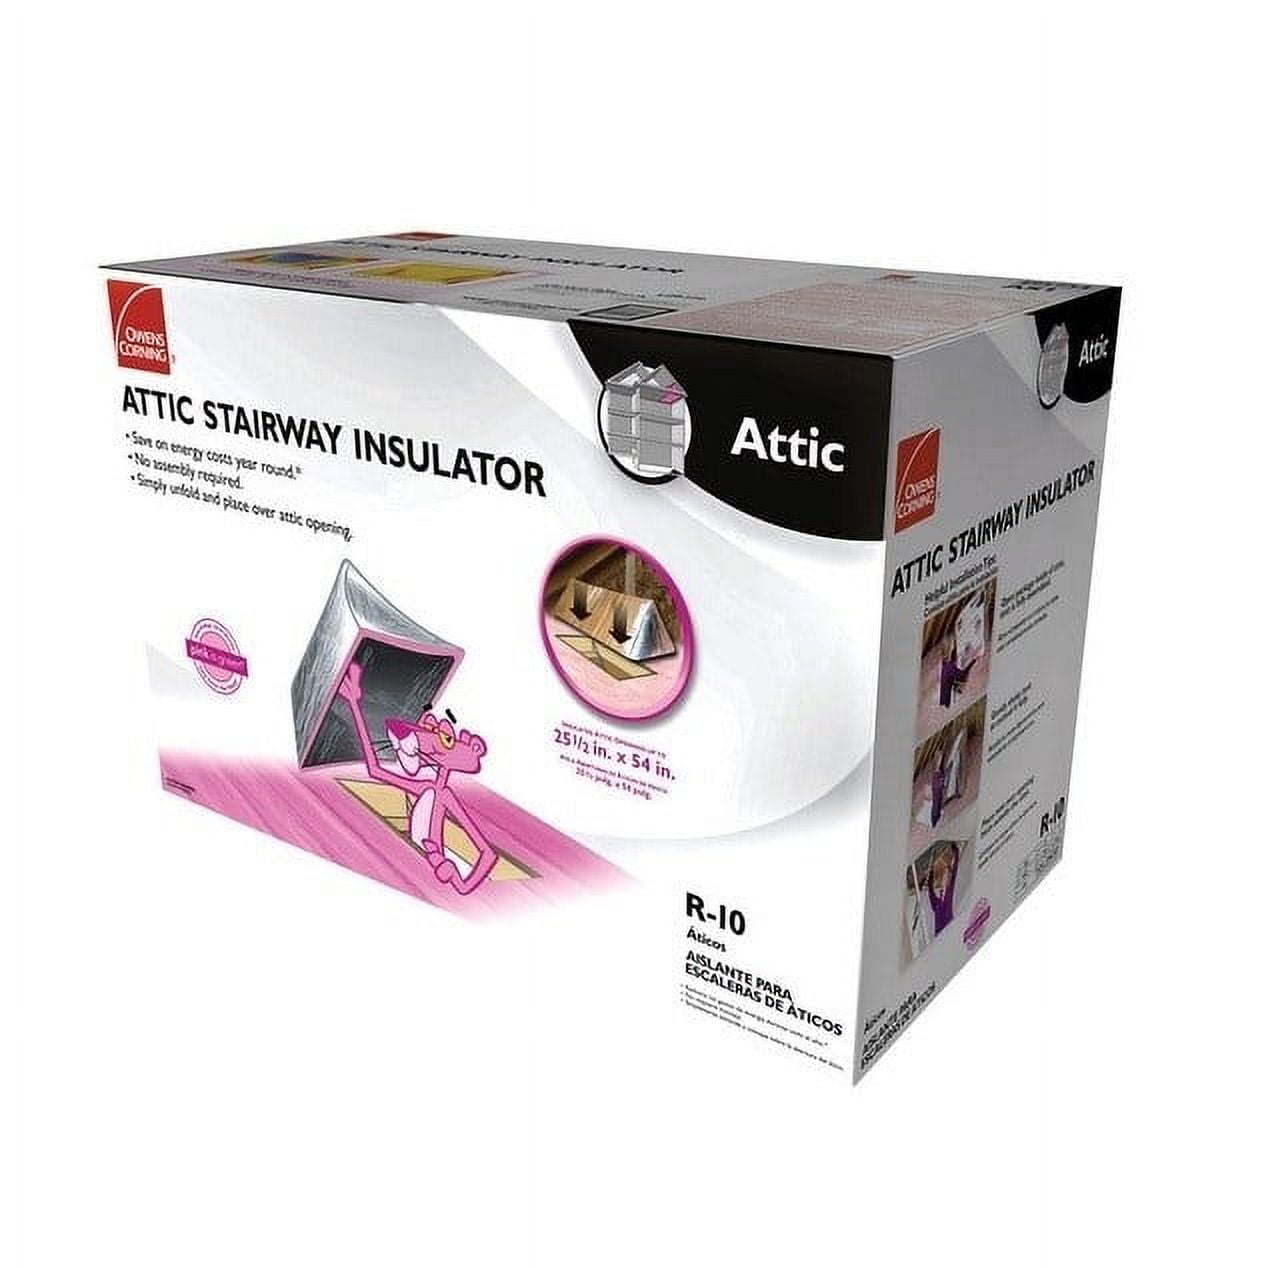 Attic Stairway Insulator  Buy Attic Stairs Insulators Direct from the  Irish Manufacturer for just €69.99 including delivery to anywhere in  Ireland (North or South)